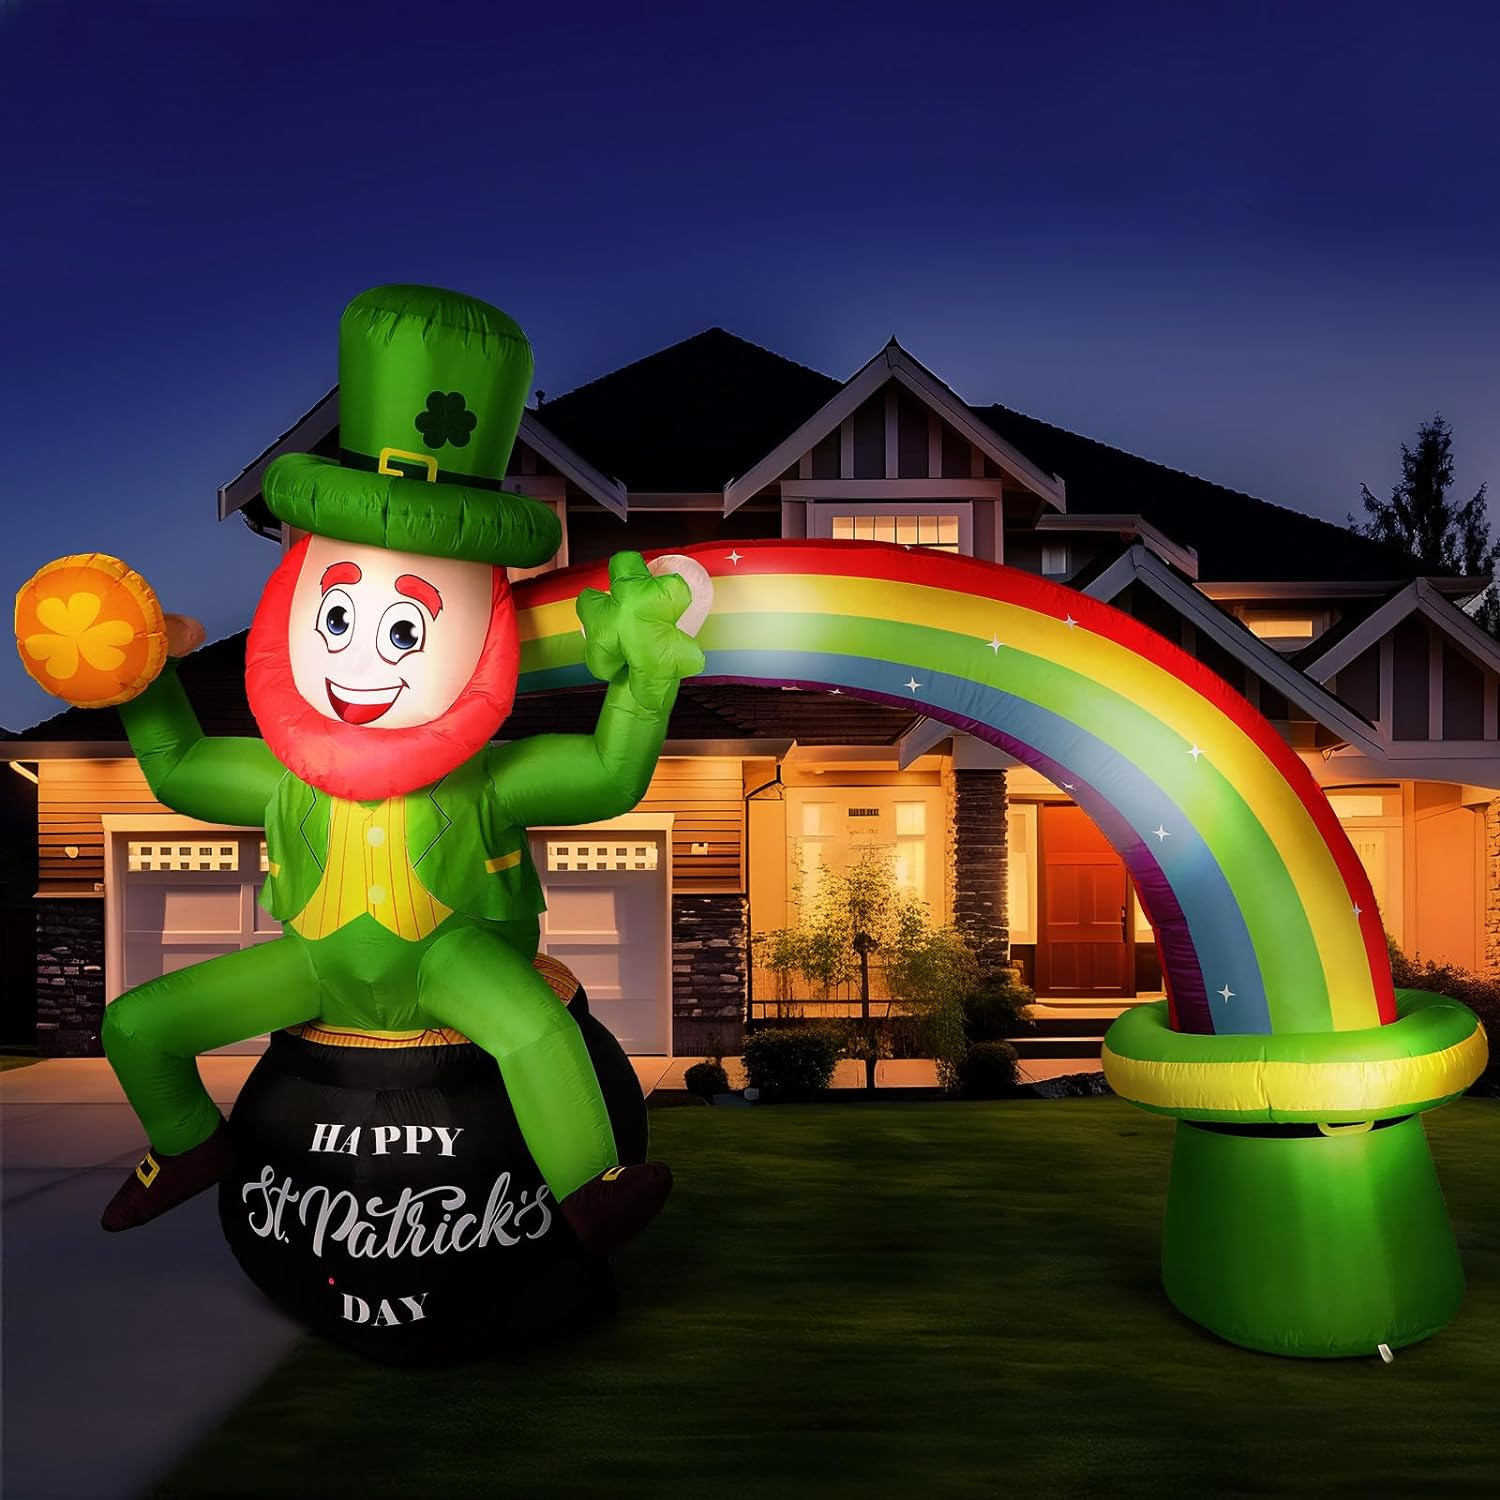 8.2 Ft Saint Patrick'S Day Inflatable Archway Green Leprechaun in Pot of Gold wi